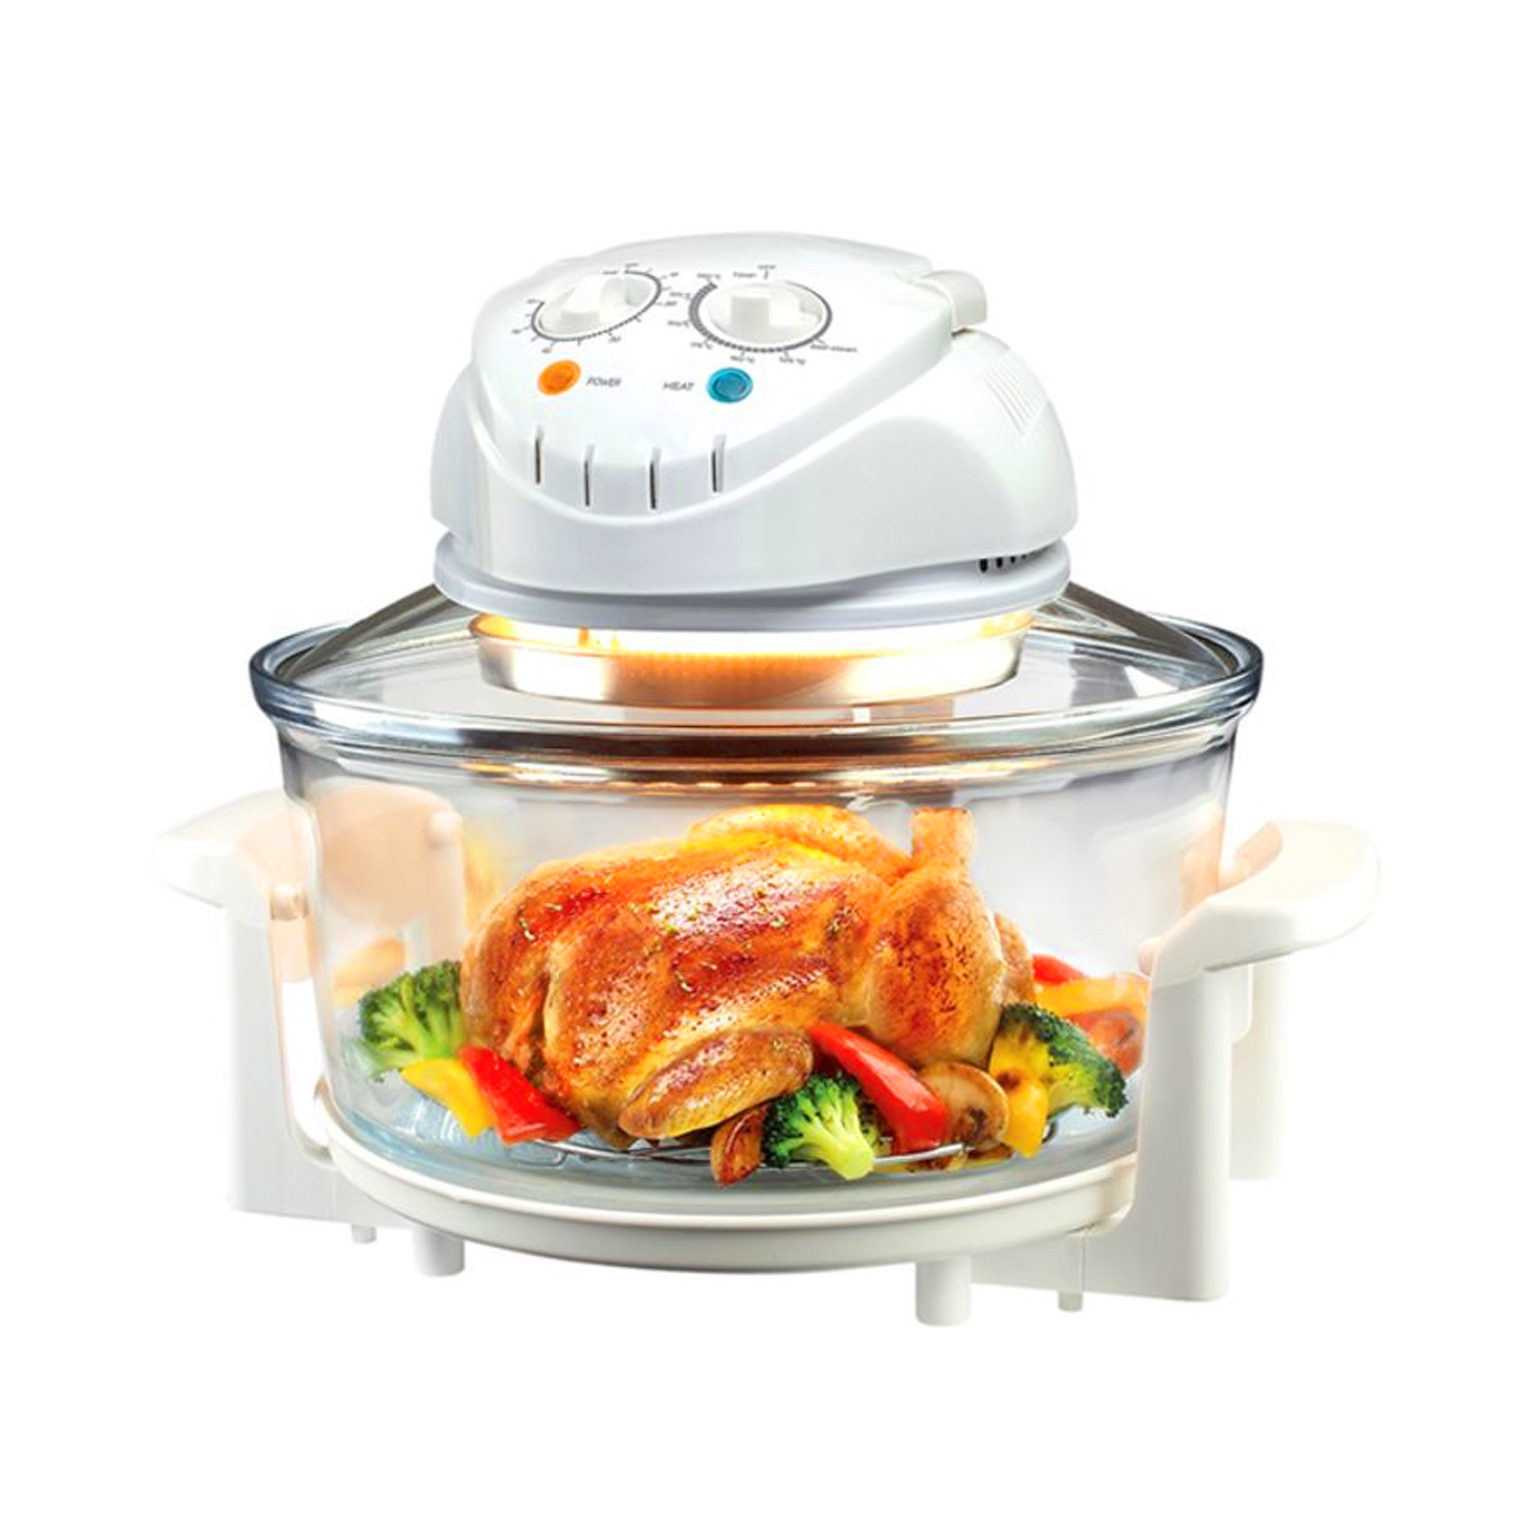 Dessini 8 In1 Halogen Electric Oven, 1400 W, DS-366-8